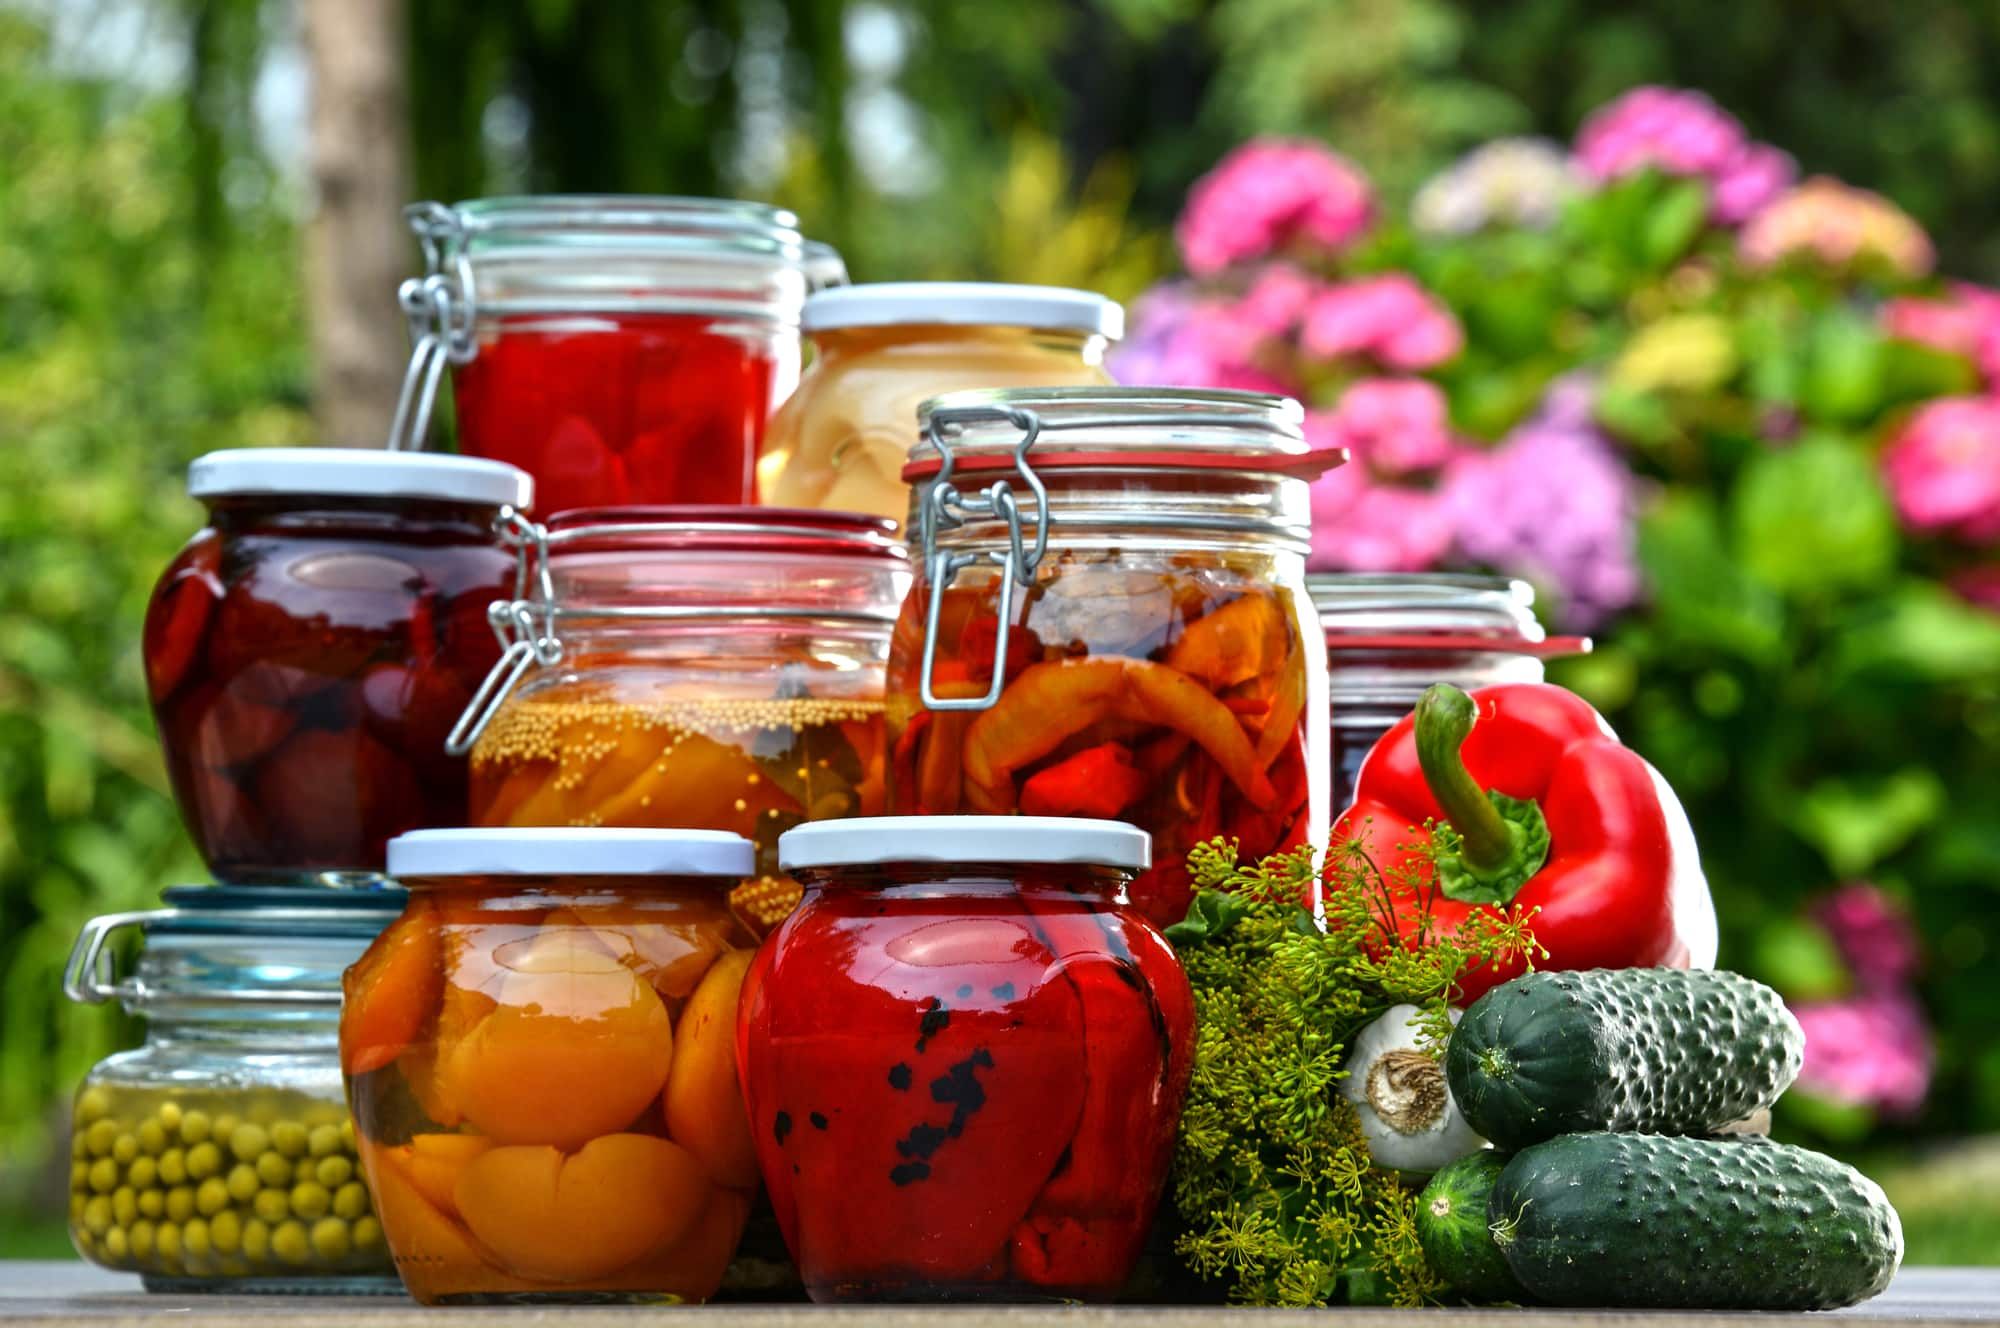 Jars of pickled vegetables and fruits in the garden. Marinated food.